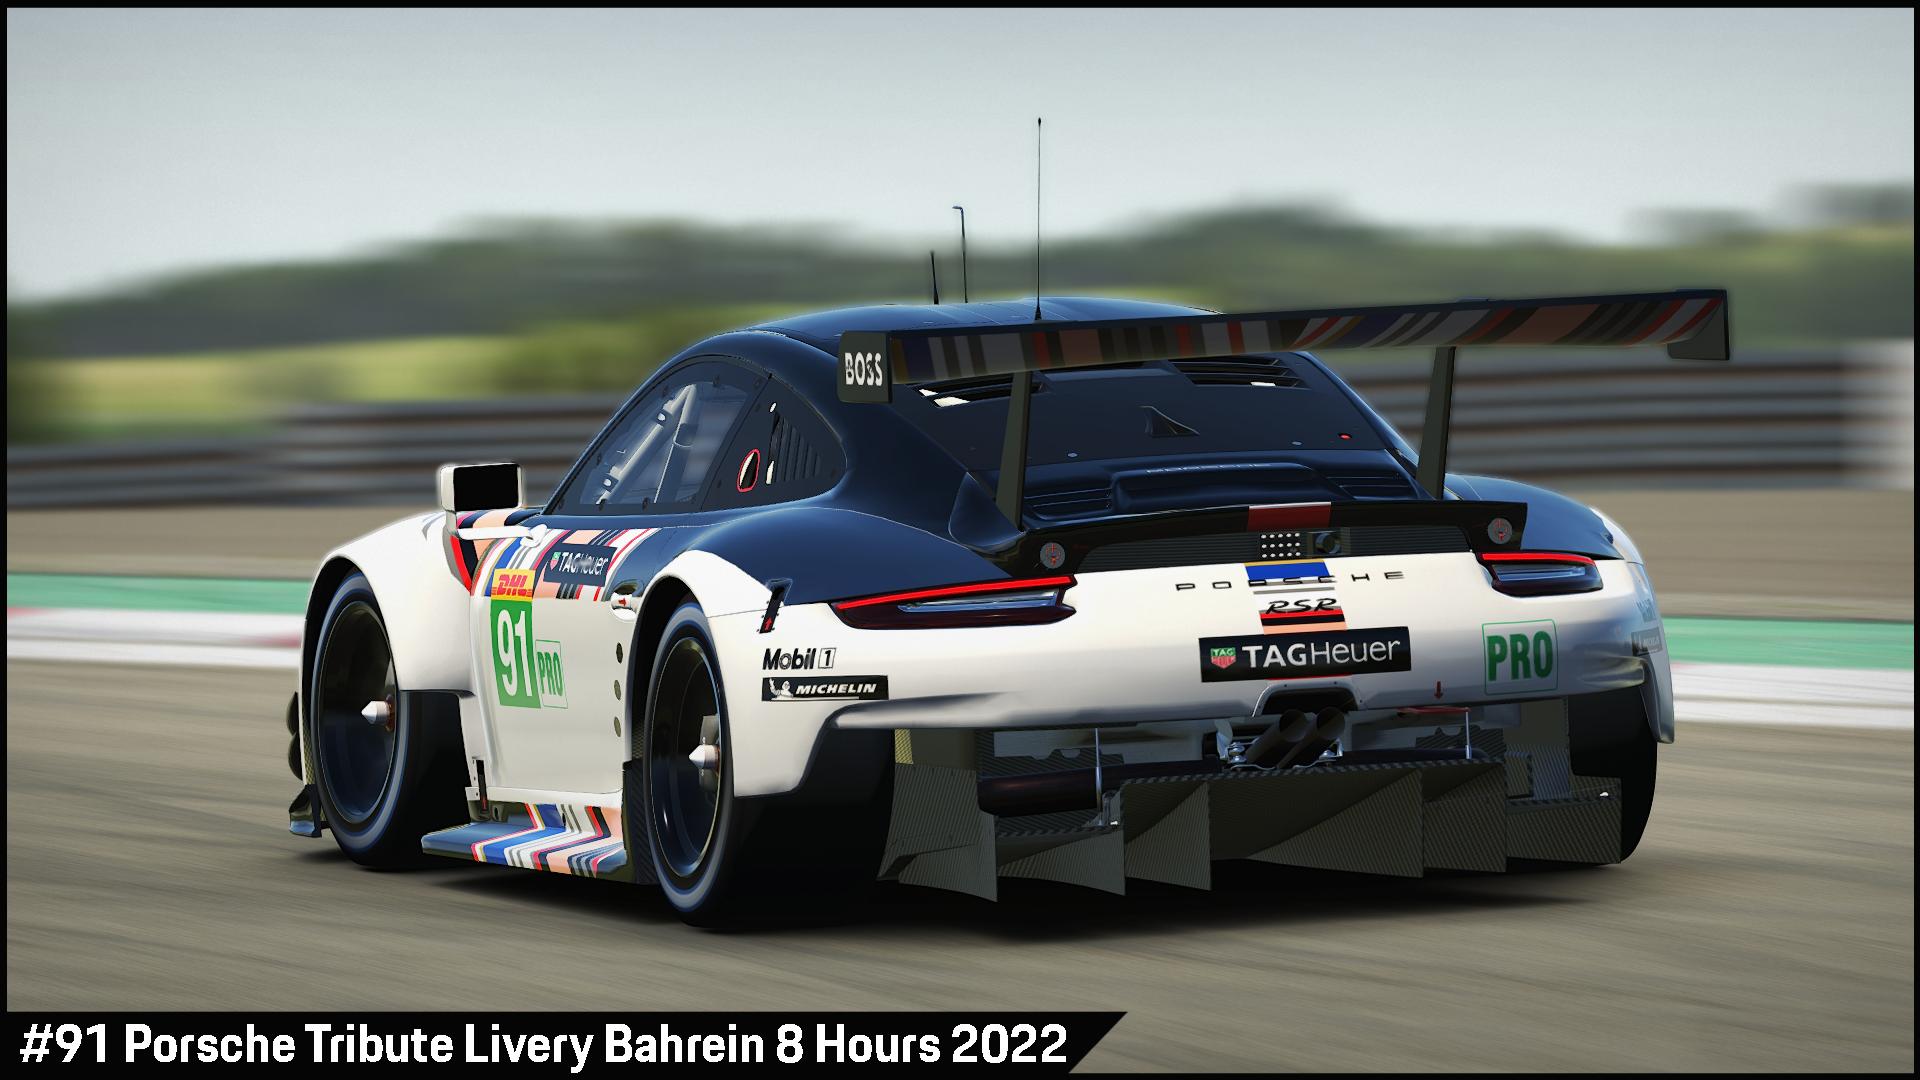 Preview of #91 Porsche Tribute Livery Bahrein 8 Hours 2022 by Sergio Hernando